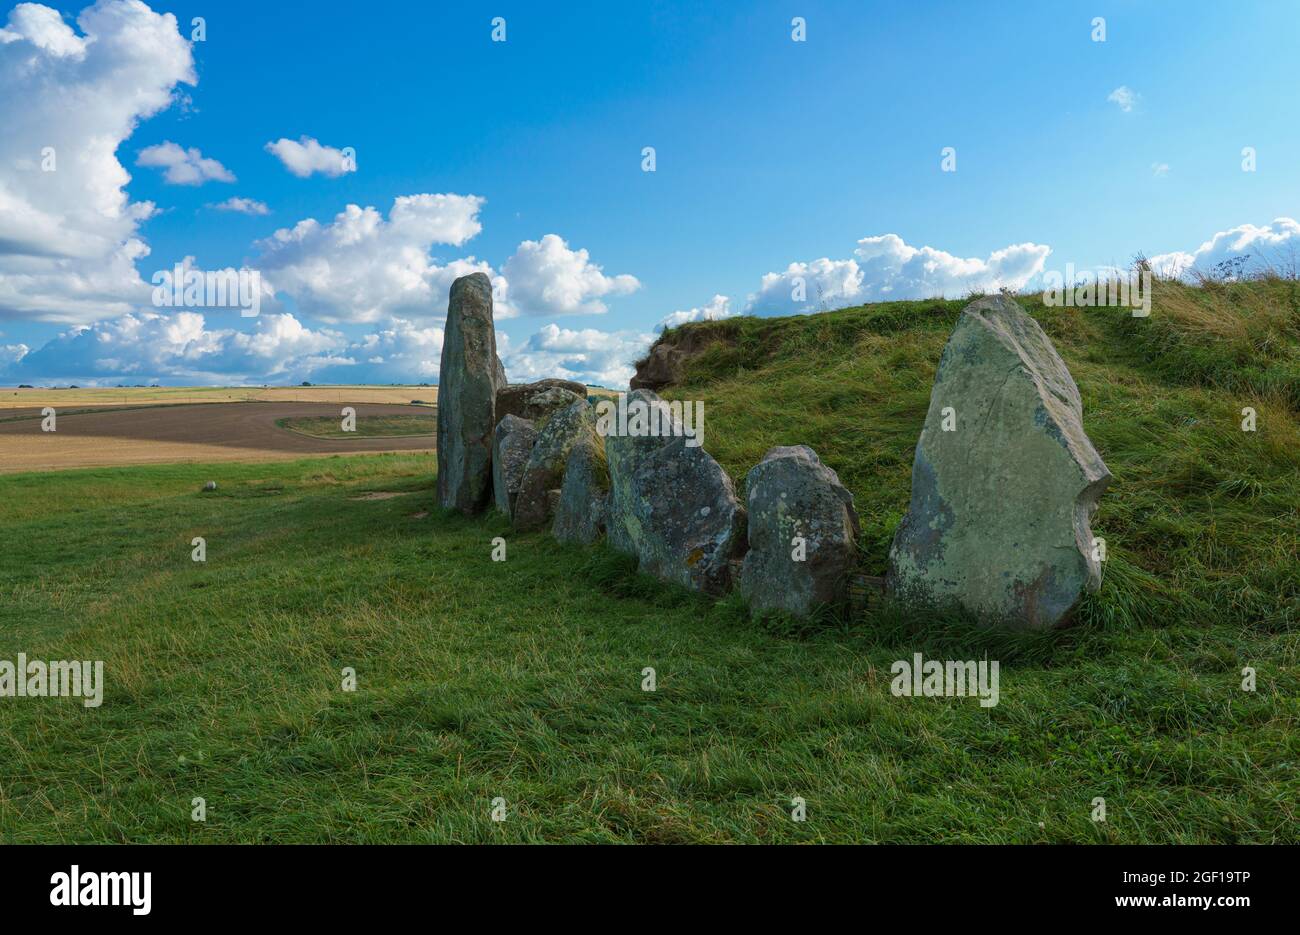 the beautiful aged stone of early neolithic chambered tombs at West Kennet Long Barrow, part of the Avebury World Heritage Site, Wiltshire UK Stock Photo